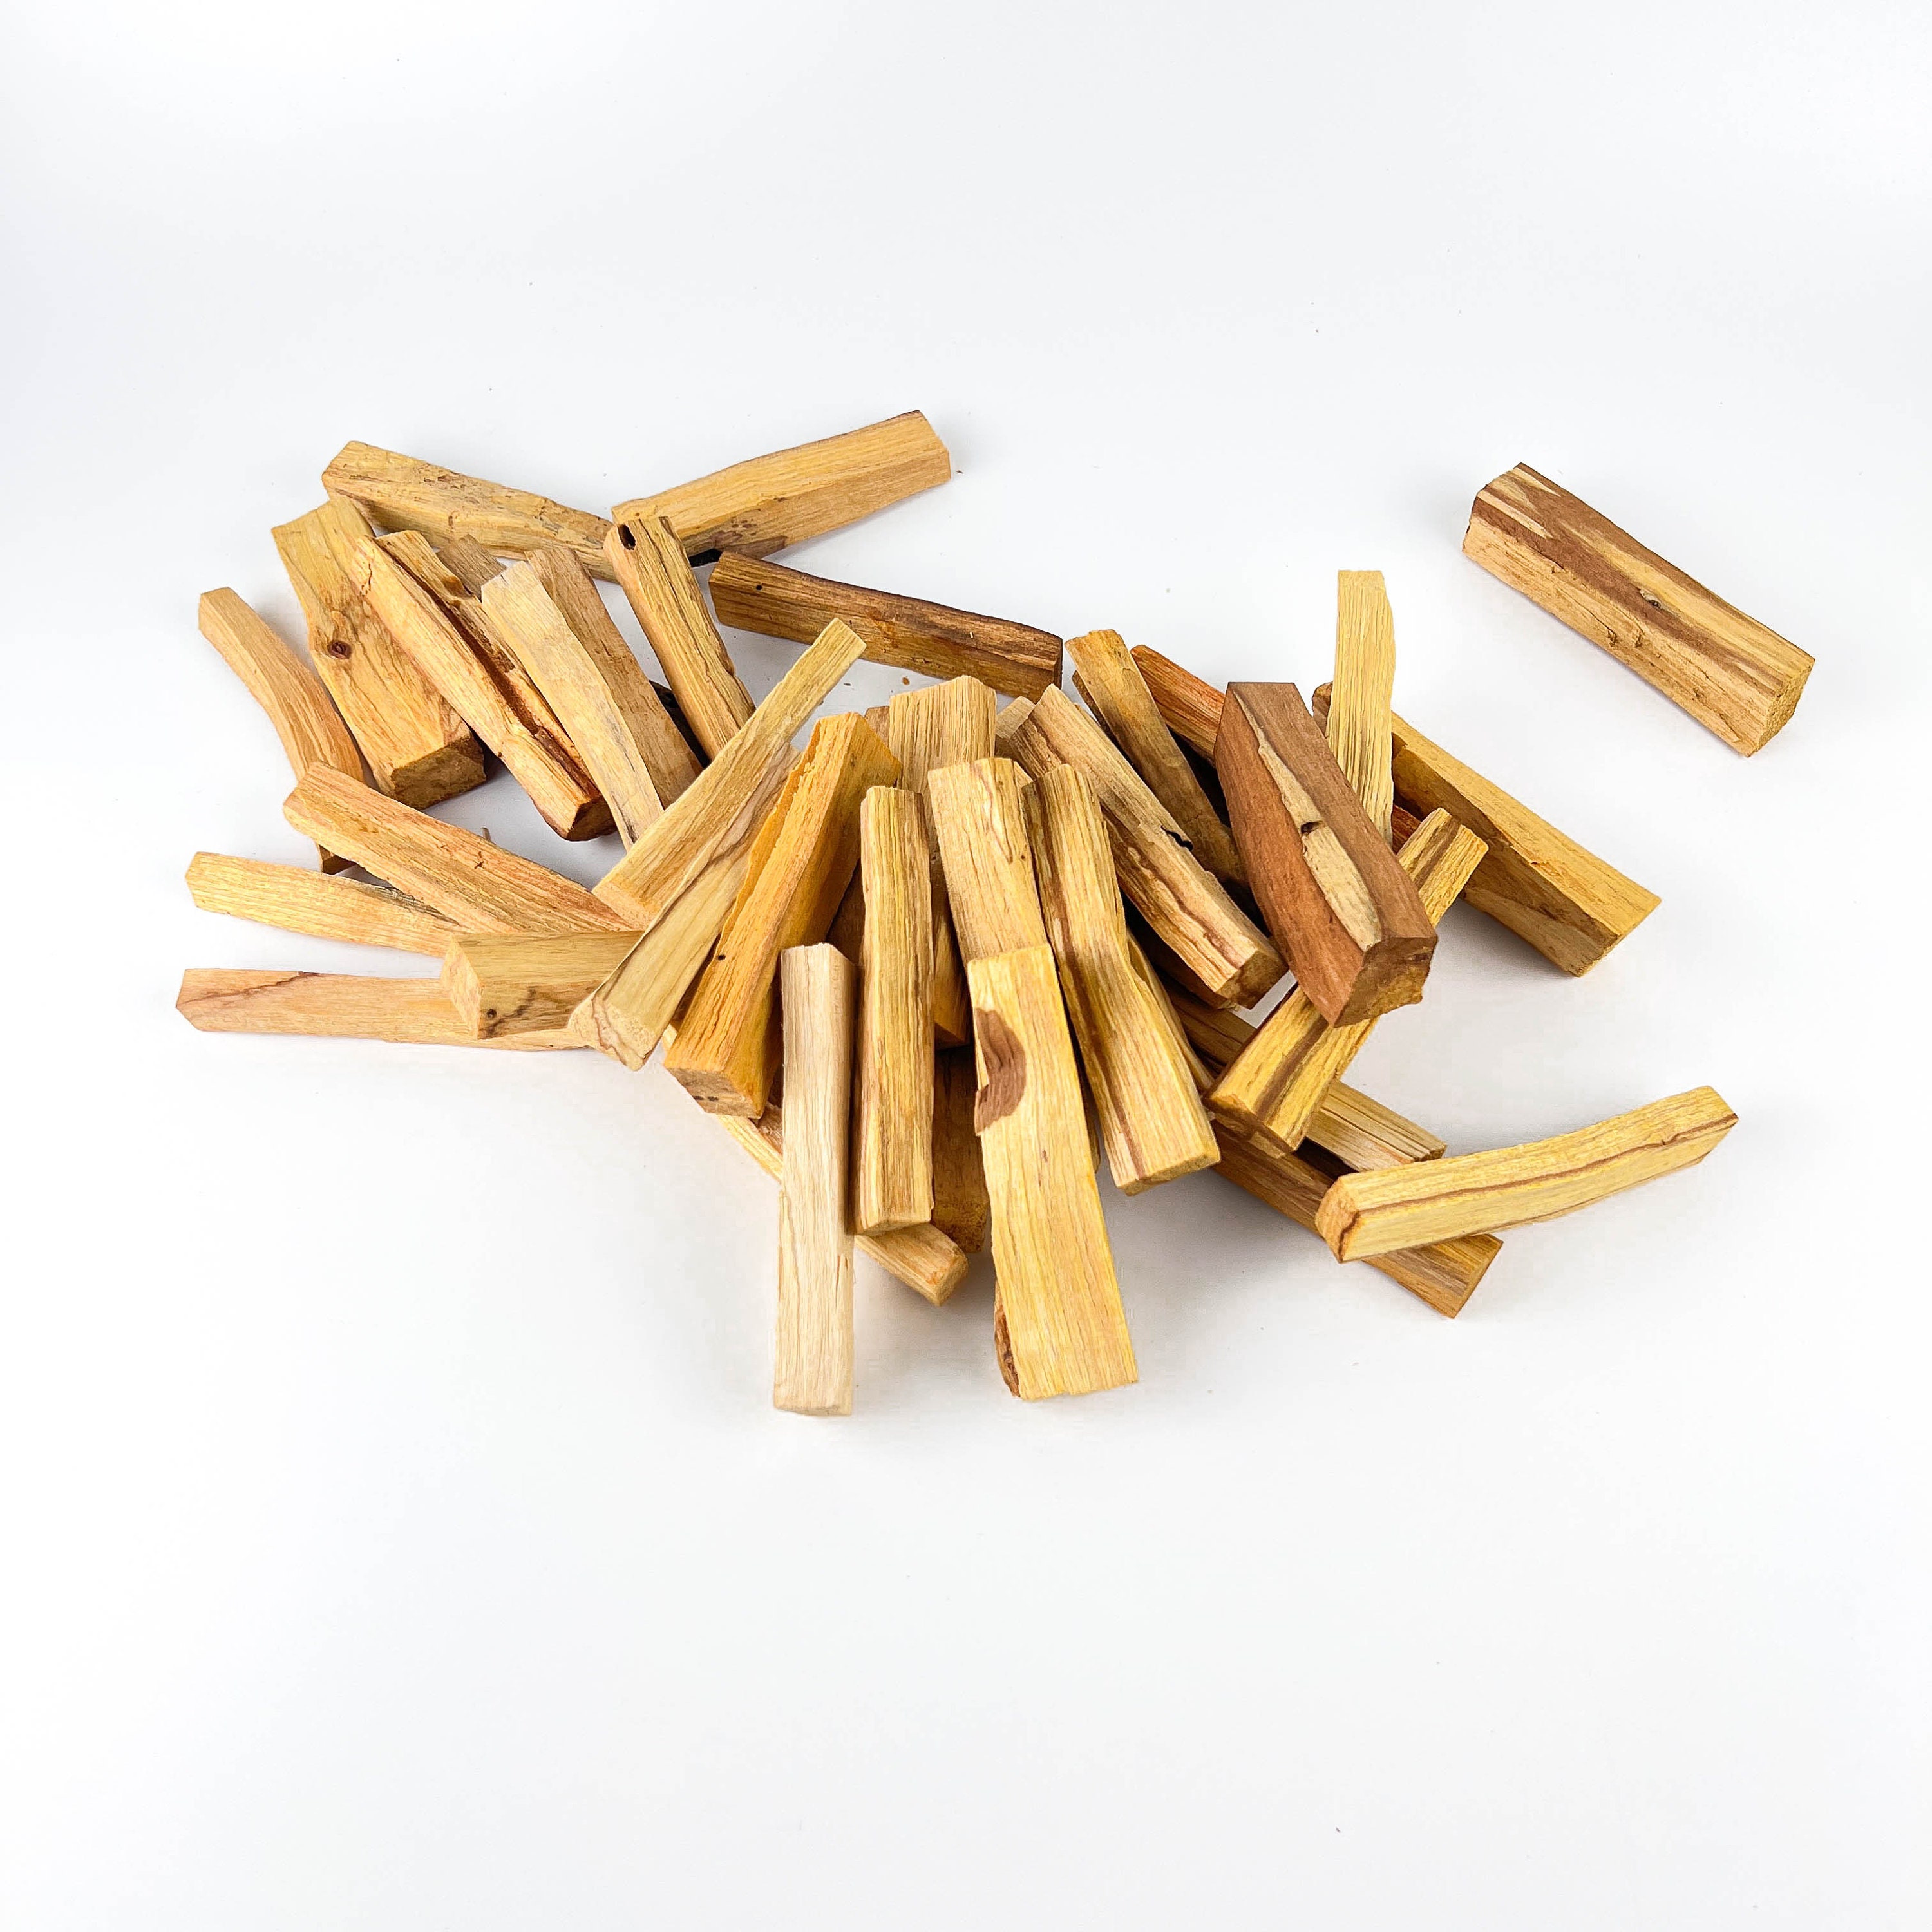 Palo Santo Essential Oil - Pure Organic Essential Oils for Diffuser -  Amarillo Quality - Palo Santo Oil ideal for Aromatherapy and Stress Relief  - 2,5